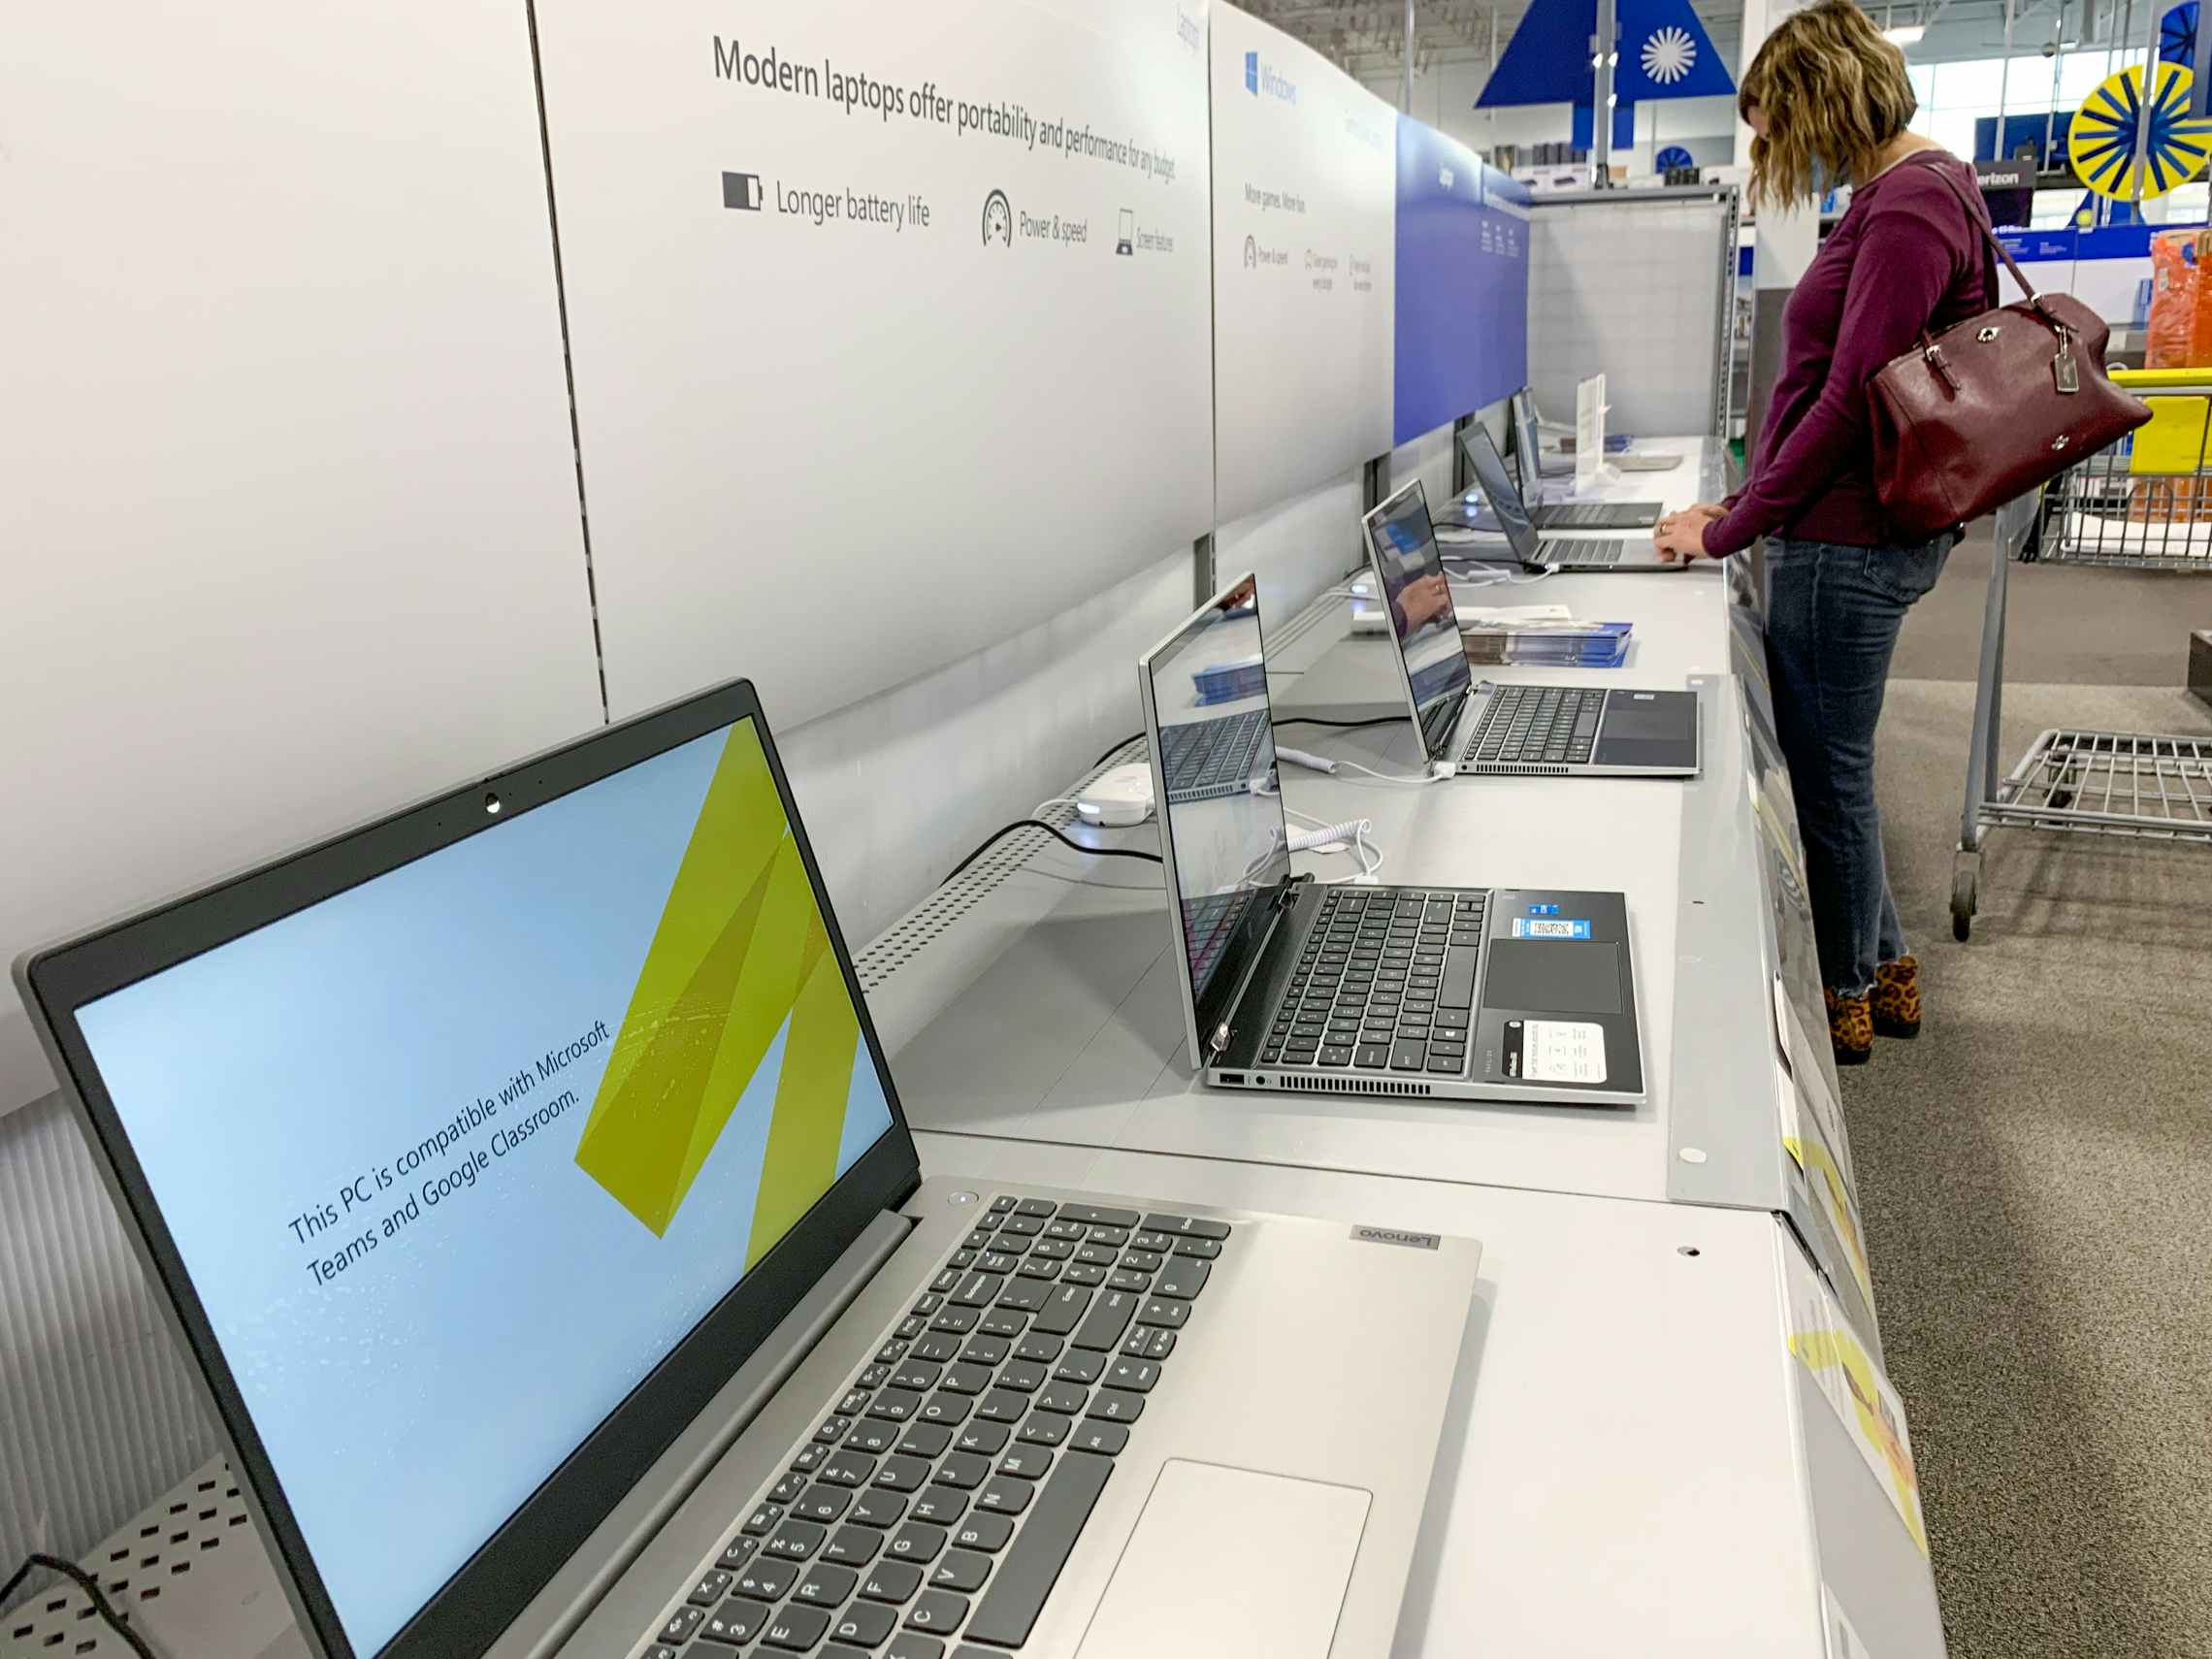 A person looking at the laptops on display at Best Buy